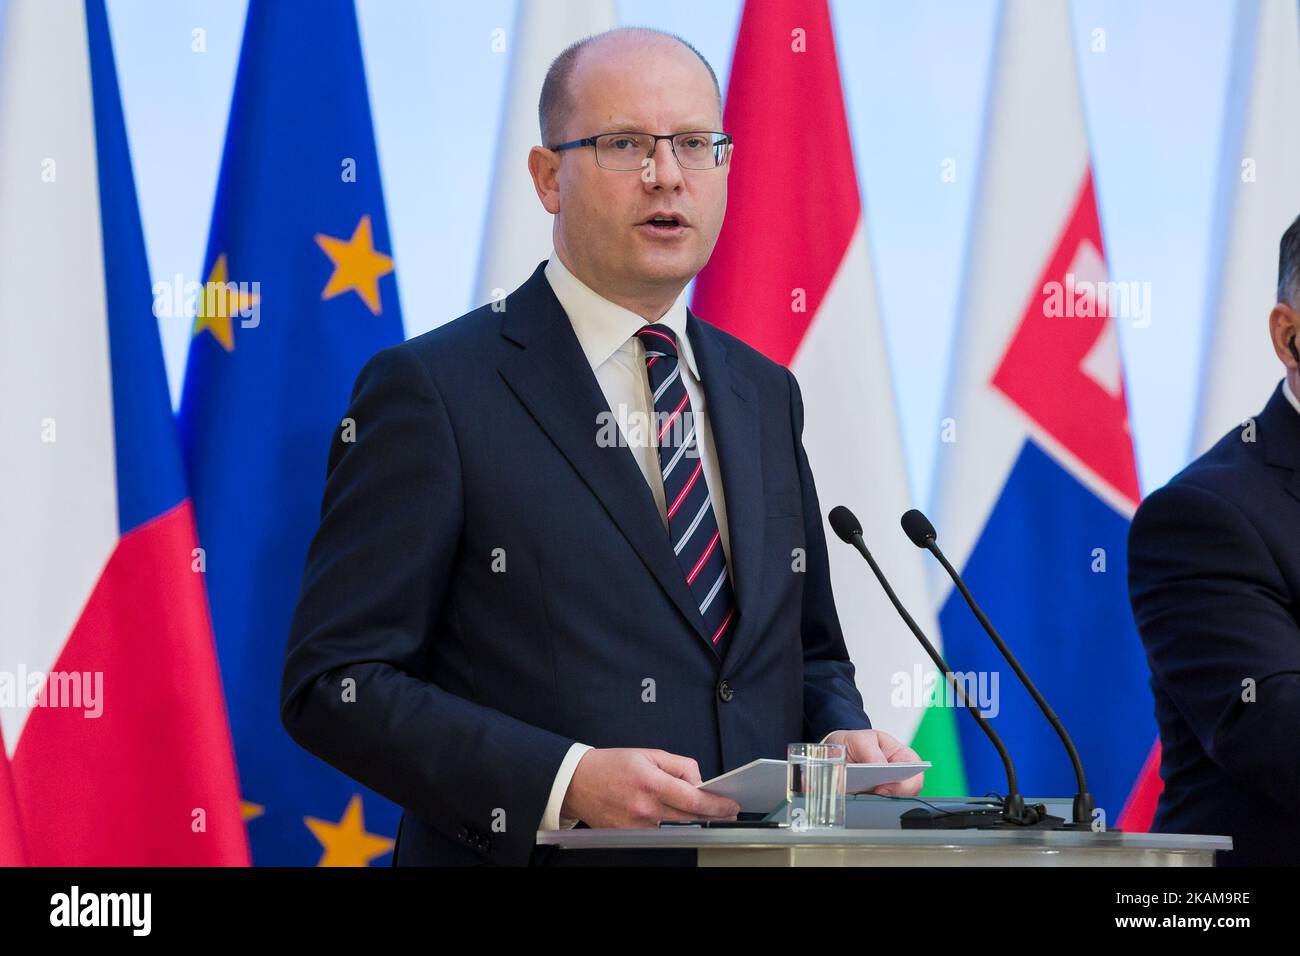 Czech Republic Prime Minister Bohuslav Sobotka during the Visegrad Group meeting in Warsaw, Poland on 28 March 2017 (Photo by Mateusz Wlodarczyk/NurPhoto) *** Please Use Credit from Credit Field *** Stock Photo